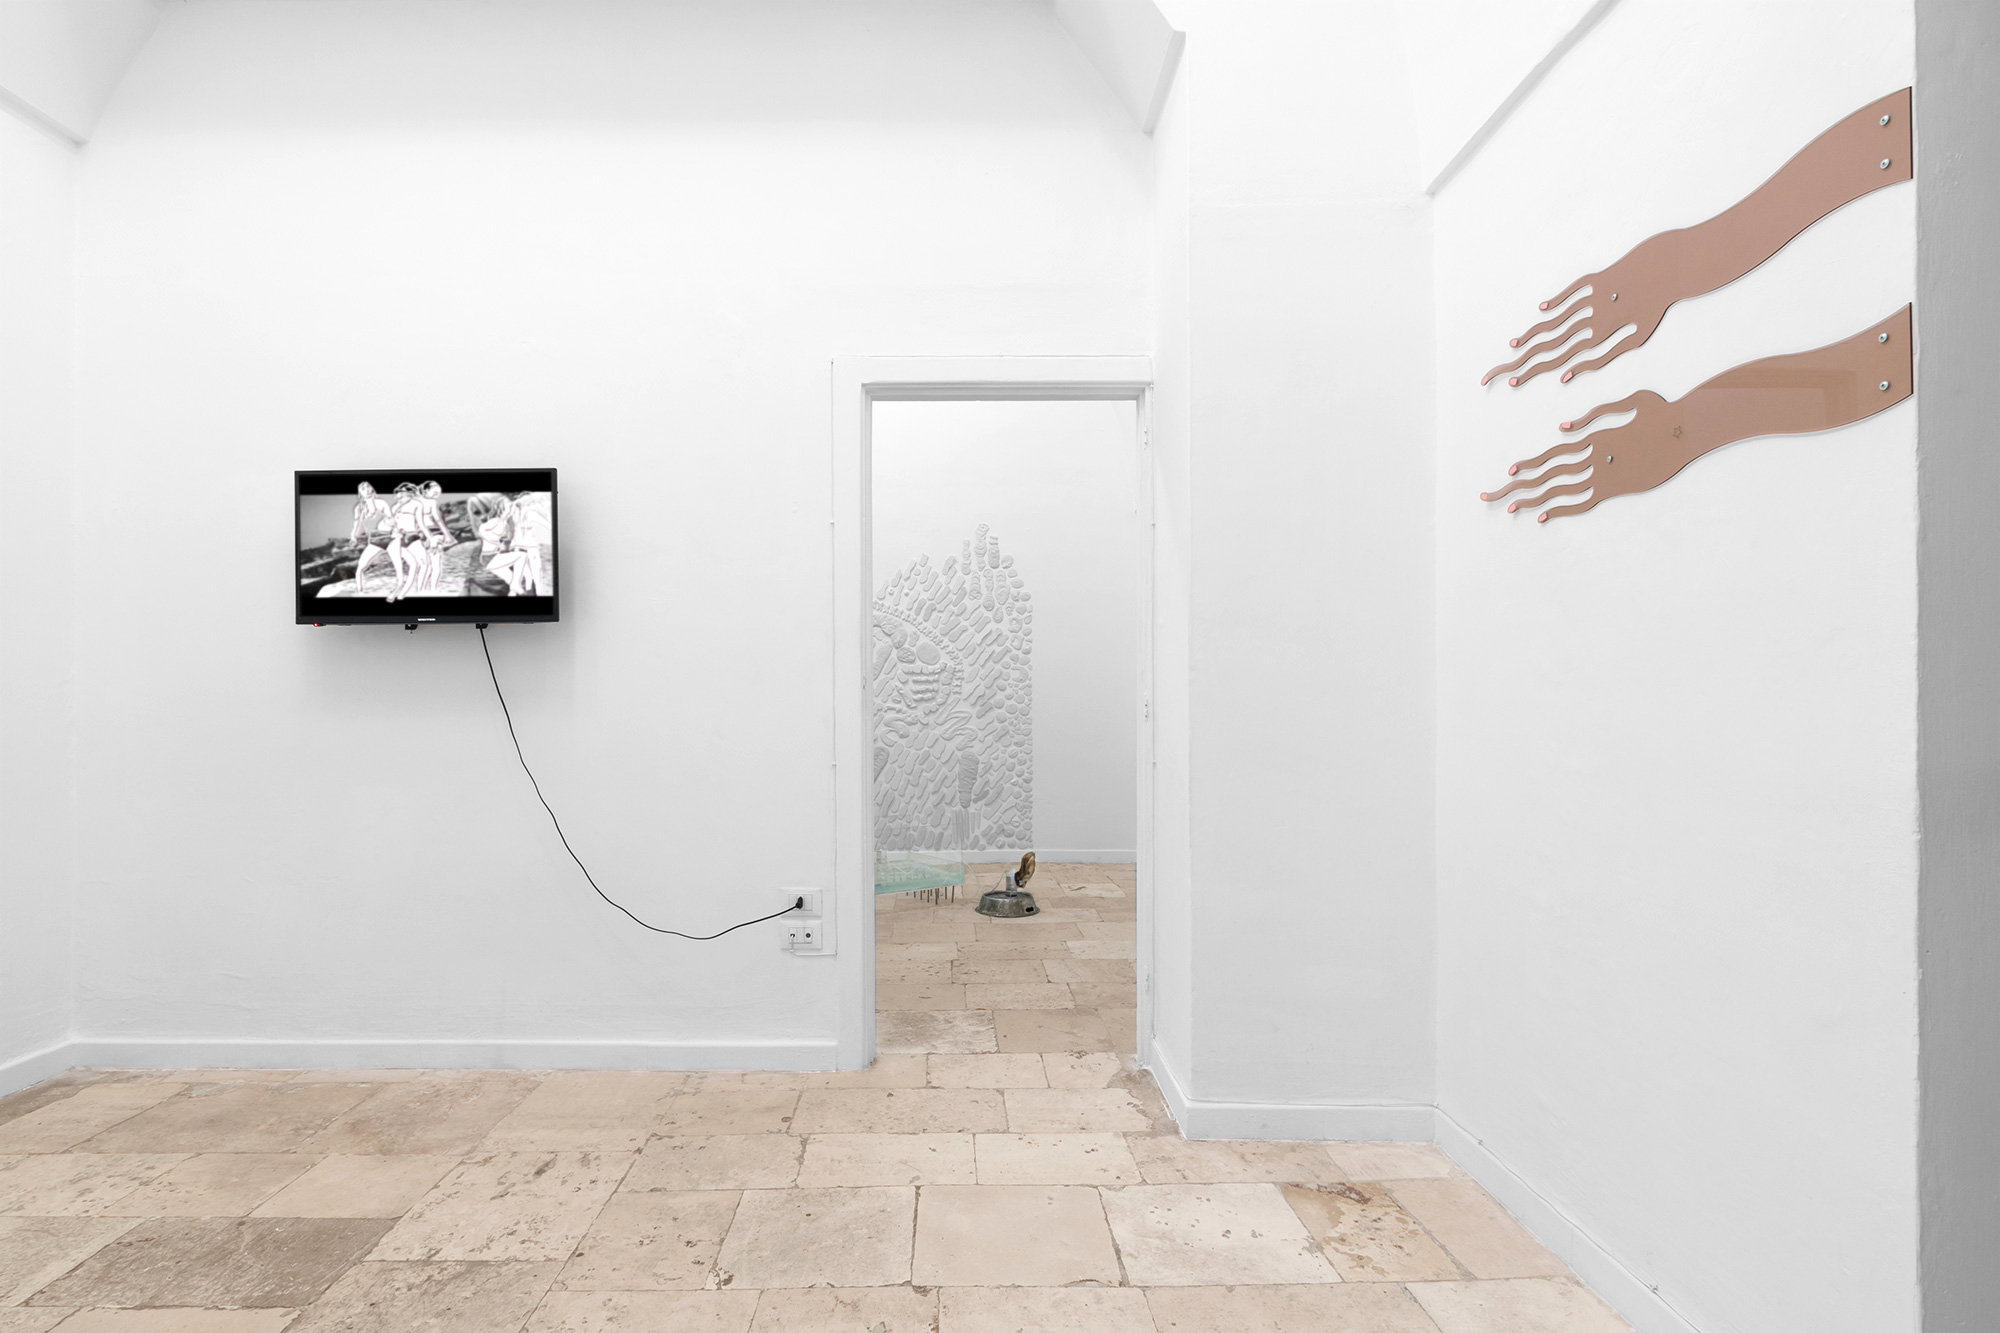 First I Have To Put My Face On installation view, 2018